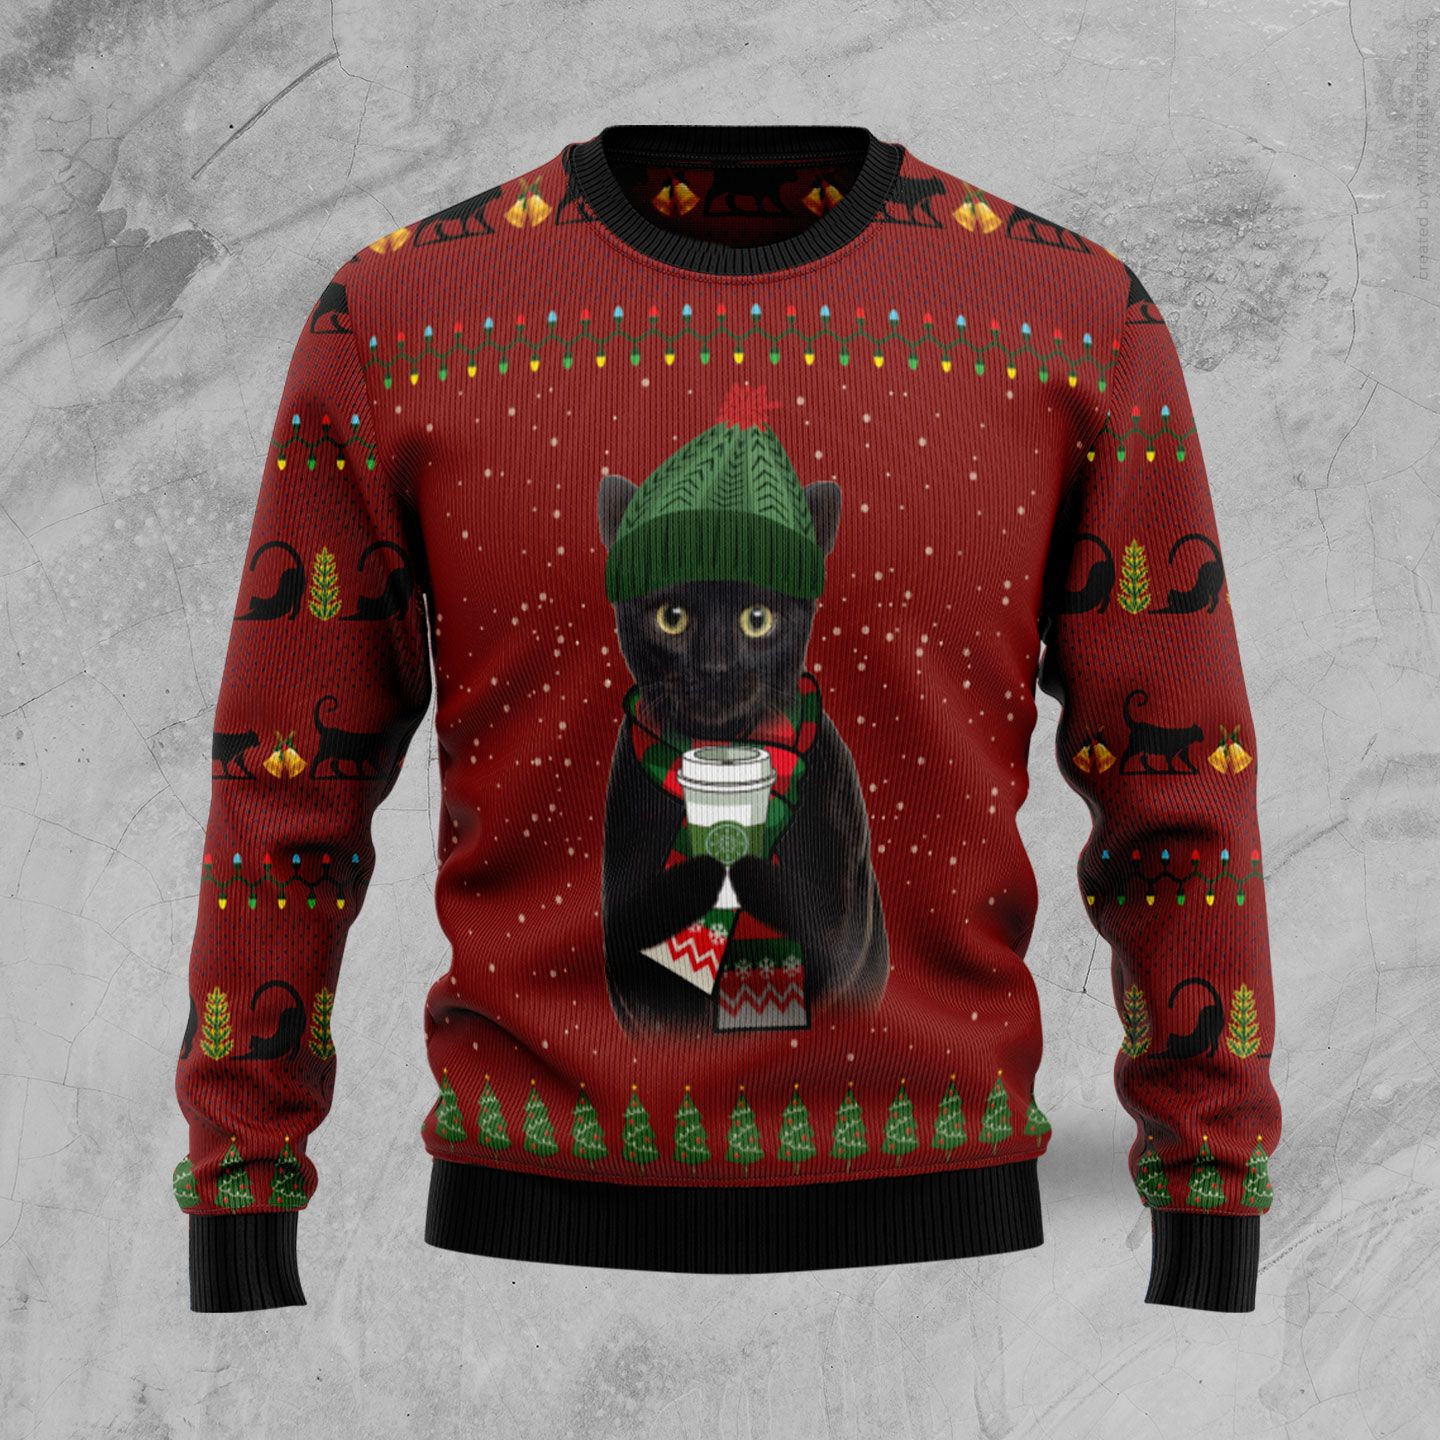 Black Cat Coffee Ugly Christmas Sweater Ugly Sweater For Men Women